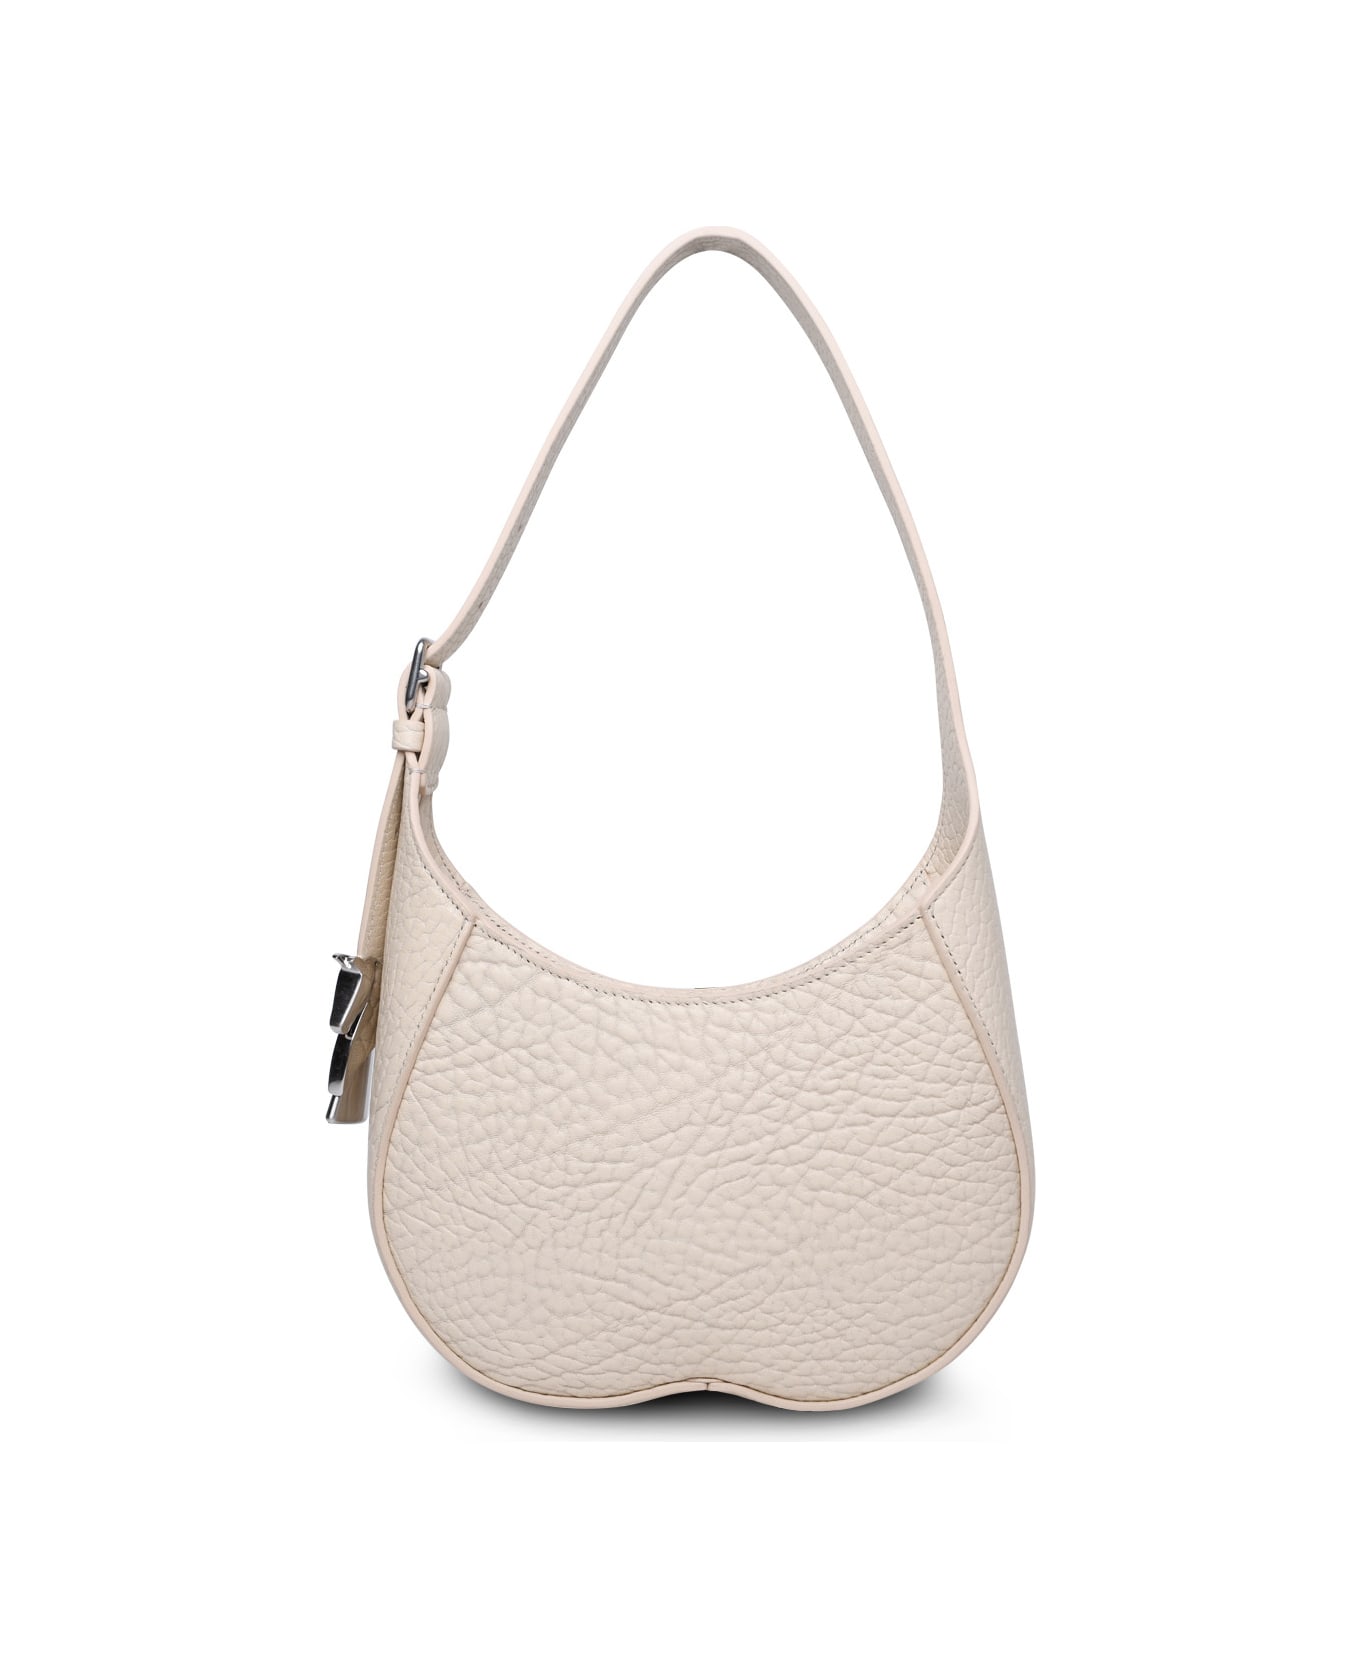 Burberry Small 'chess' Ivory Leather Bag - Avorio トートバッグ